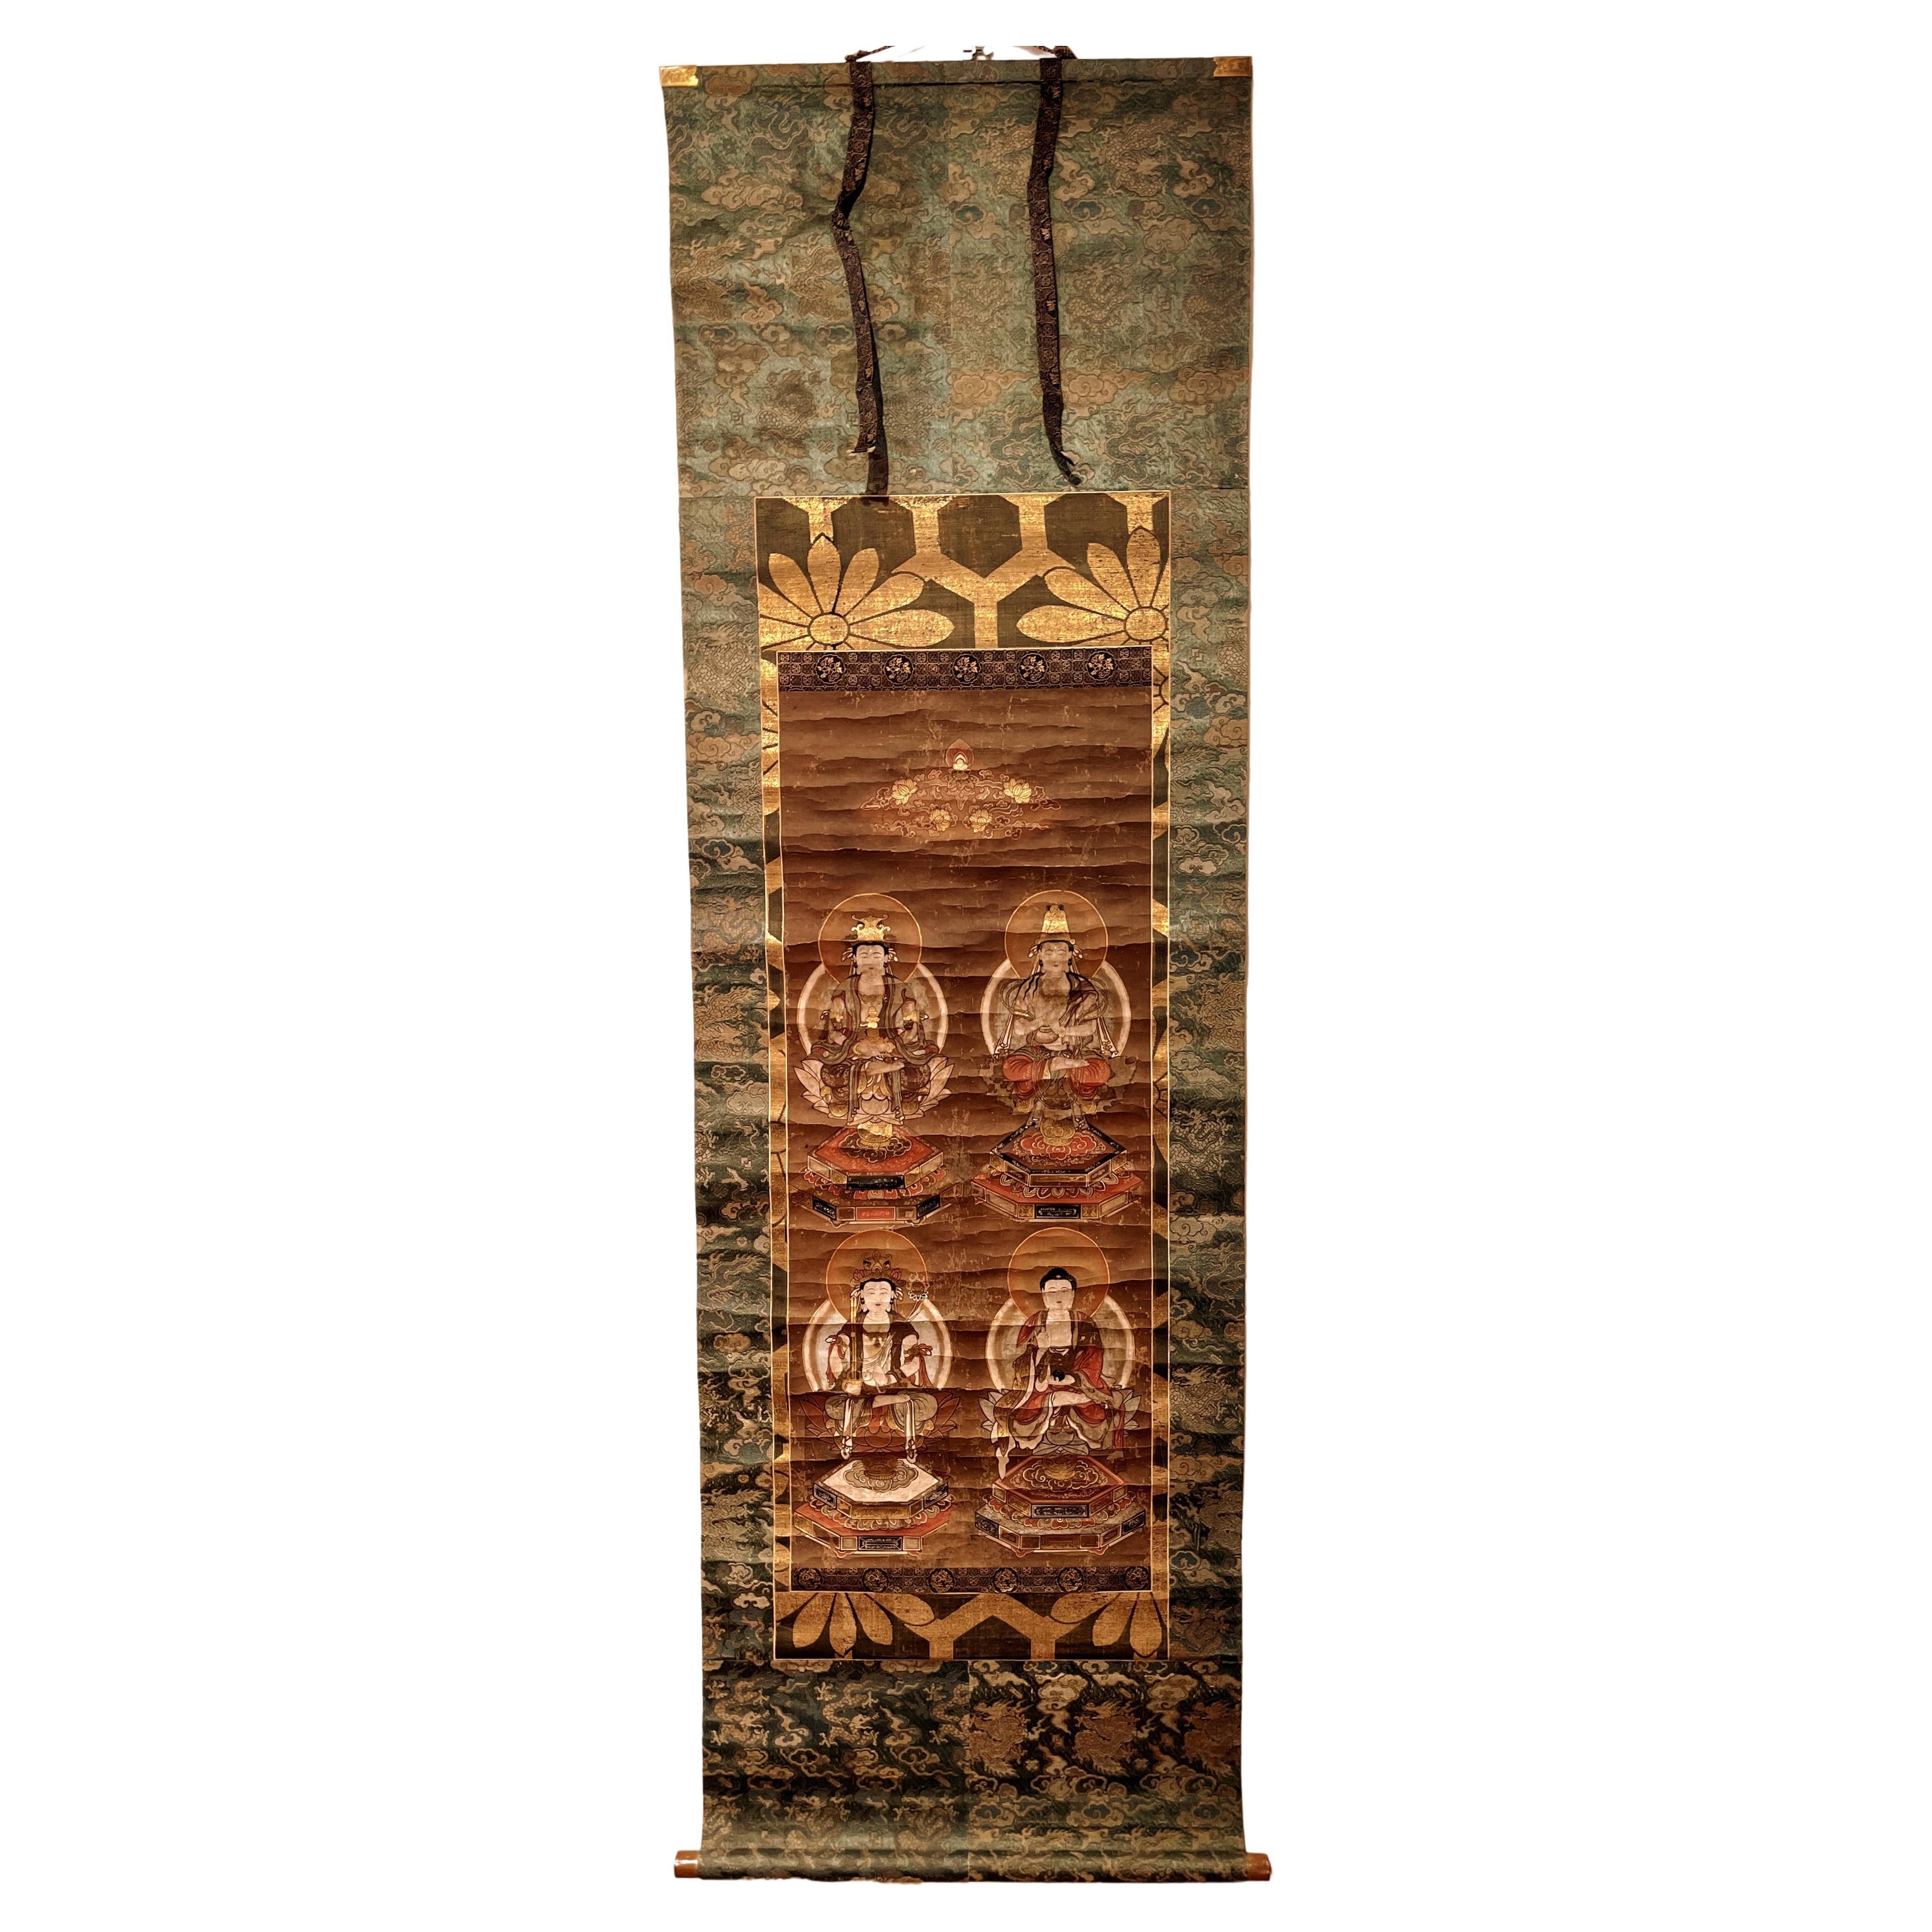 Japanese Buddhist Painting, Hanging Scroll Painting